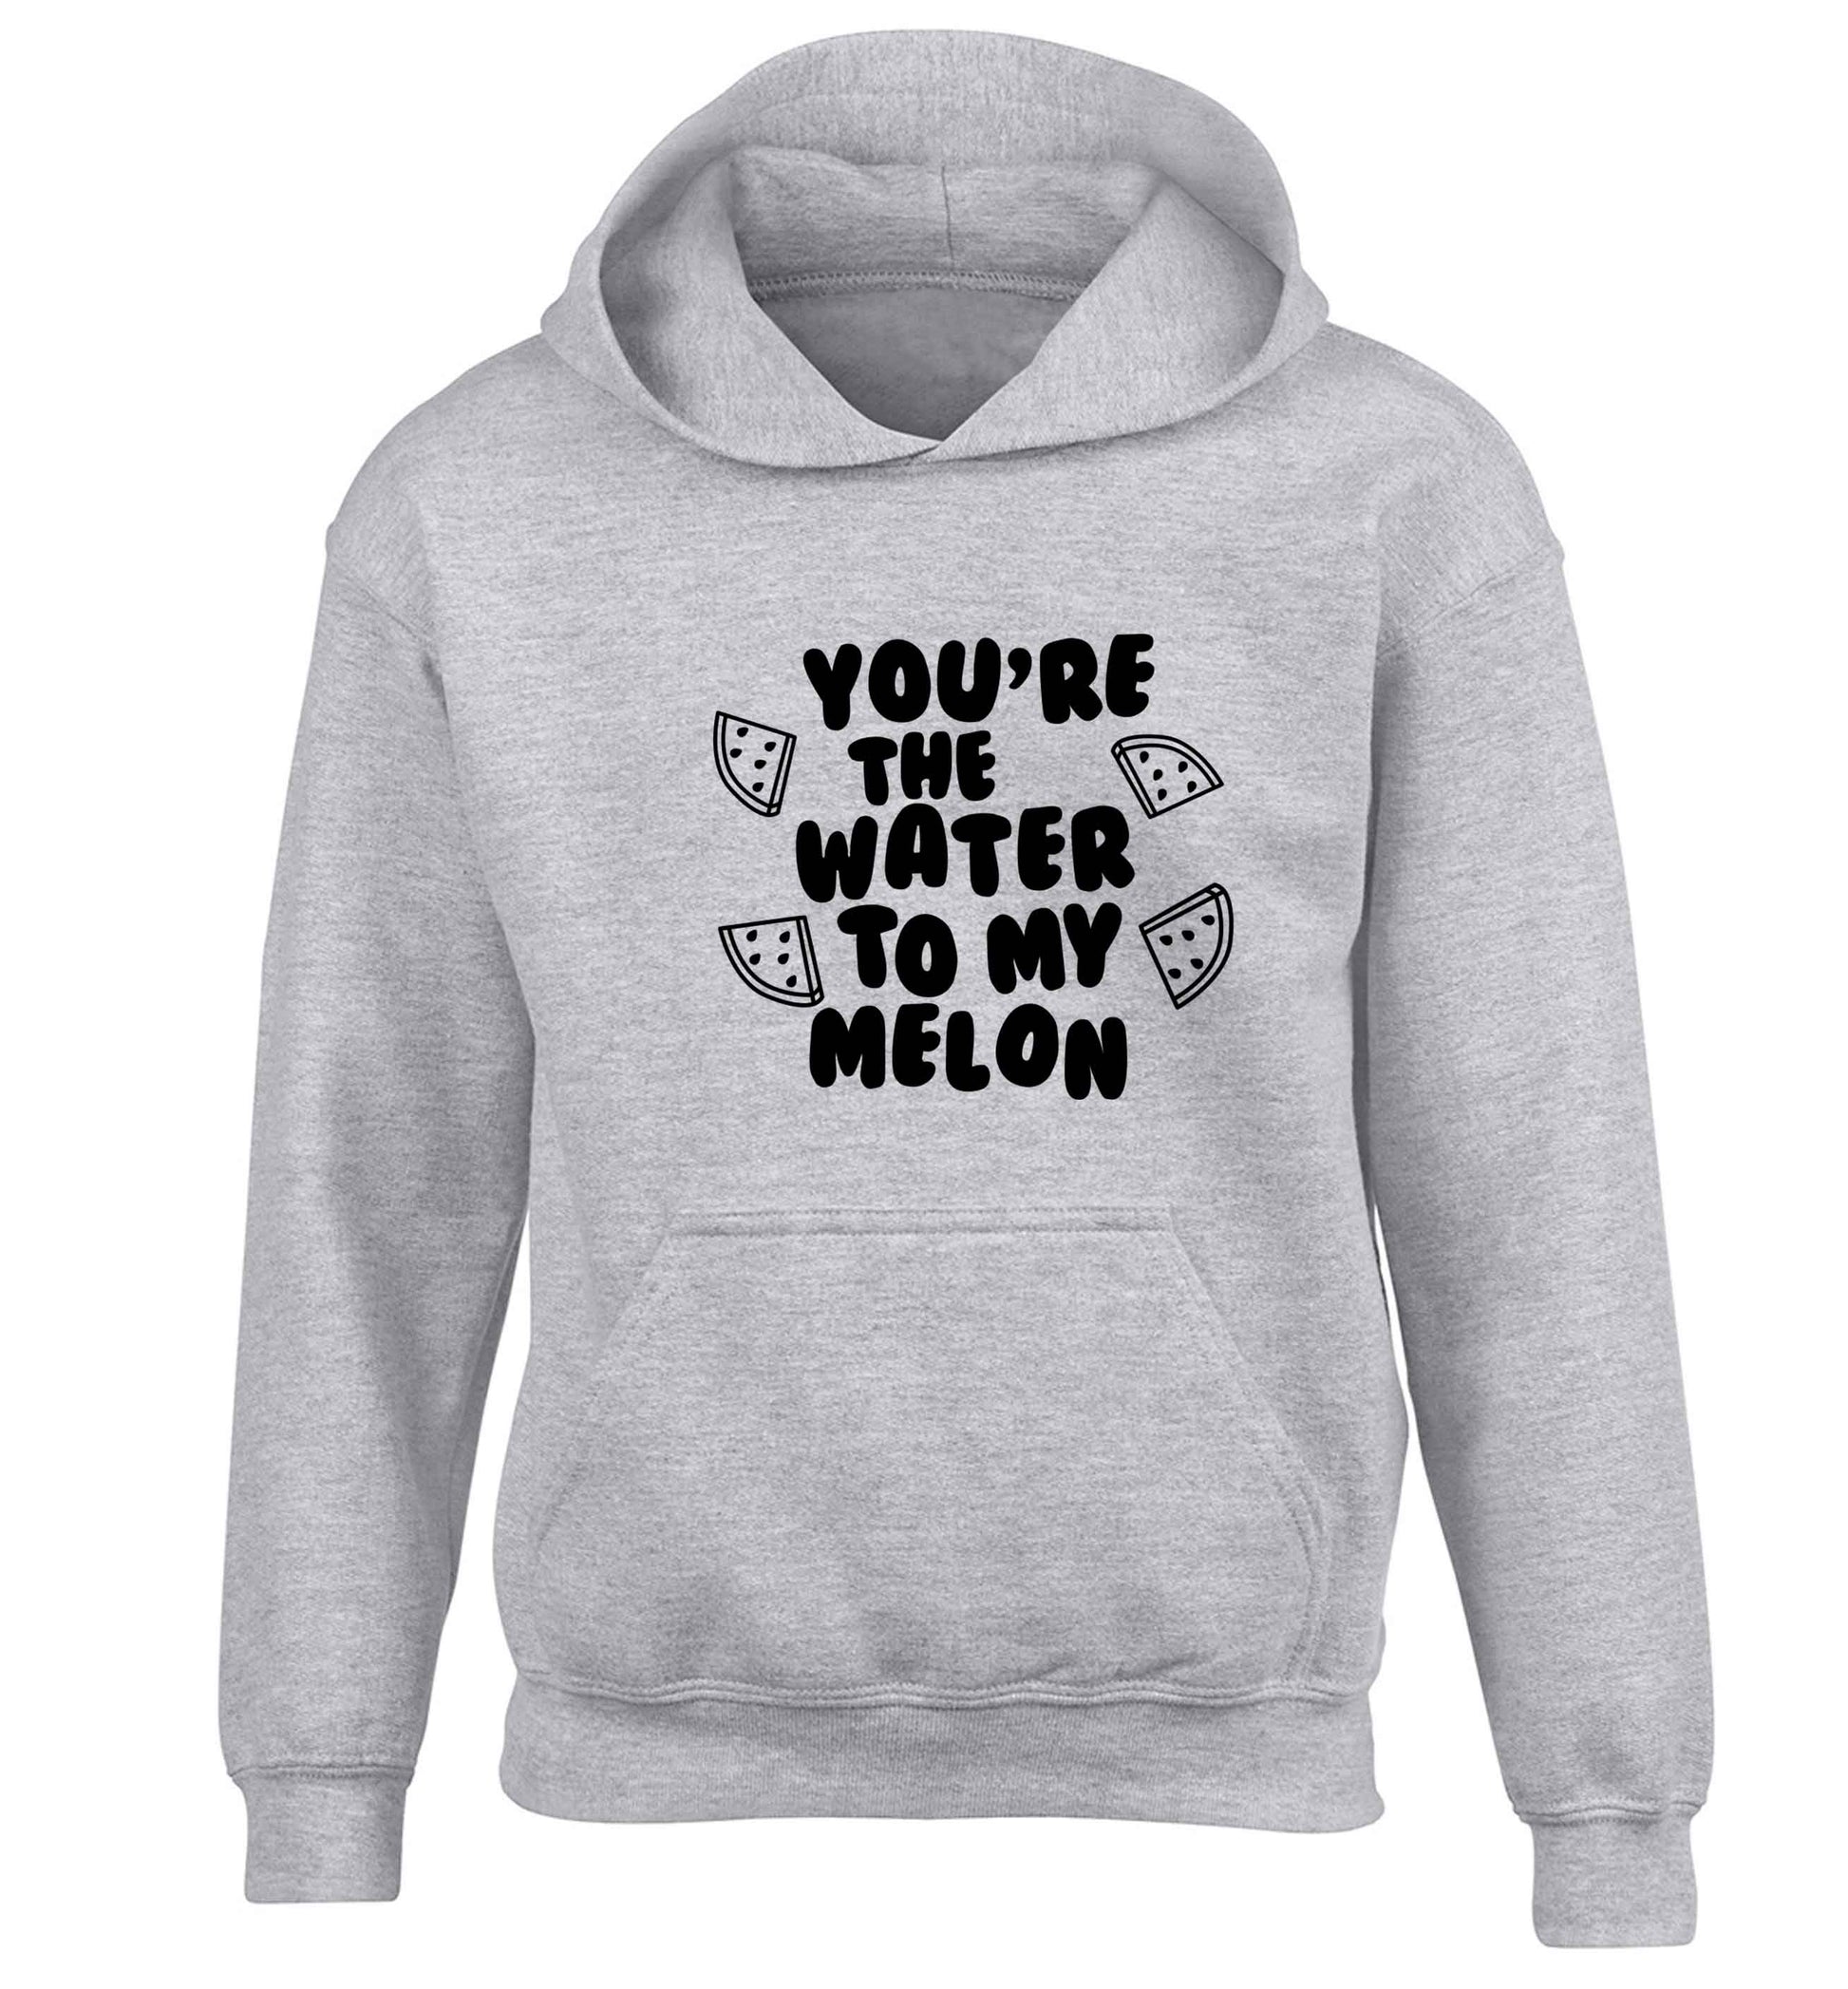 You're the water to my melon children's grey hoodie 12-13 Years